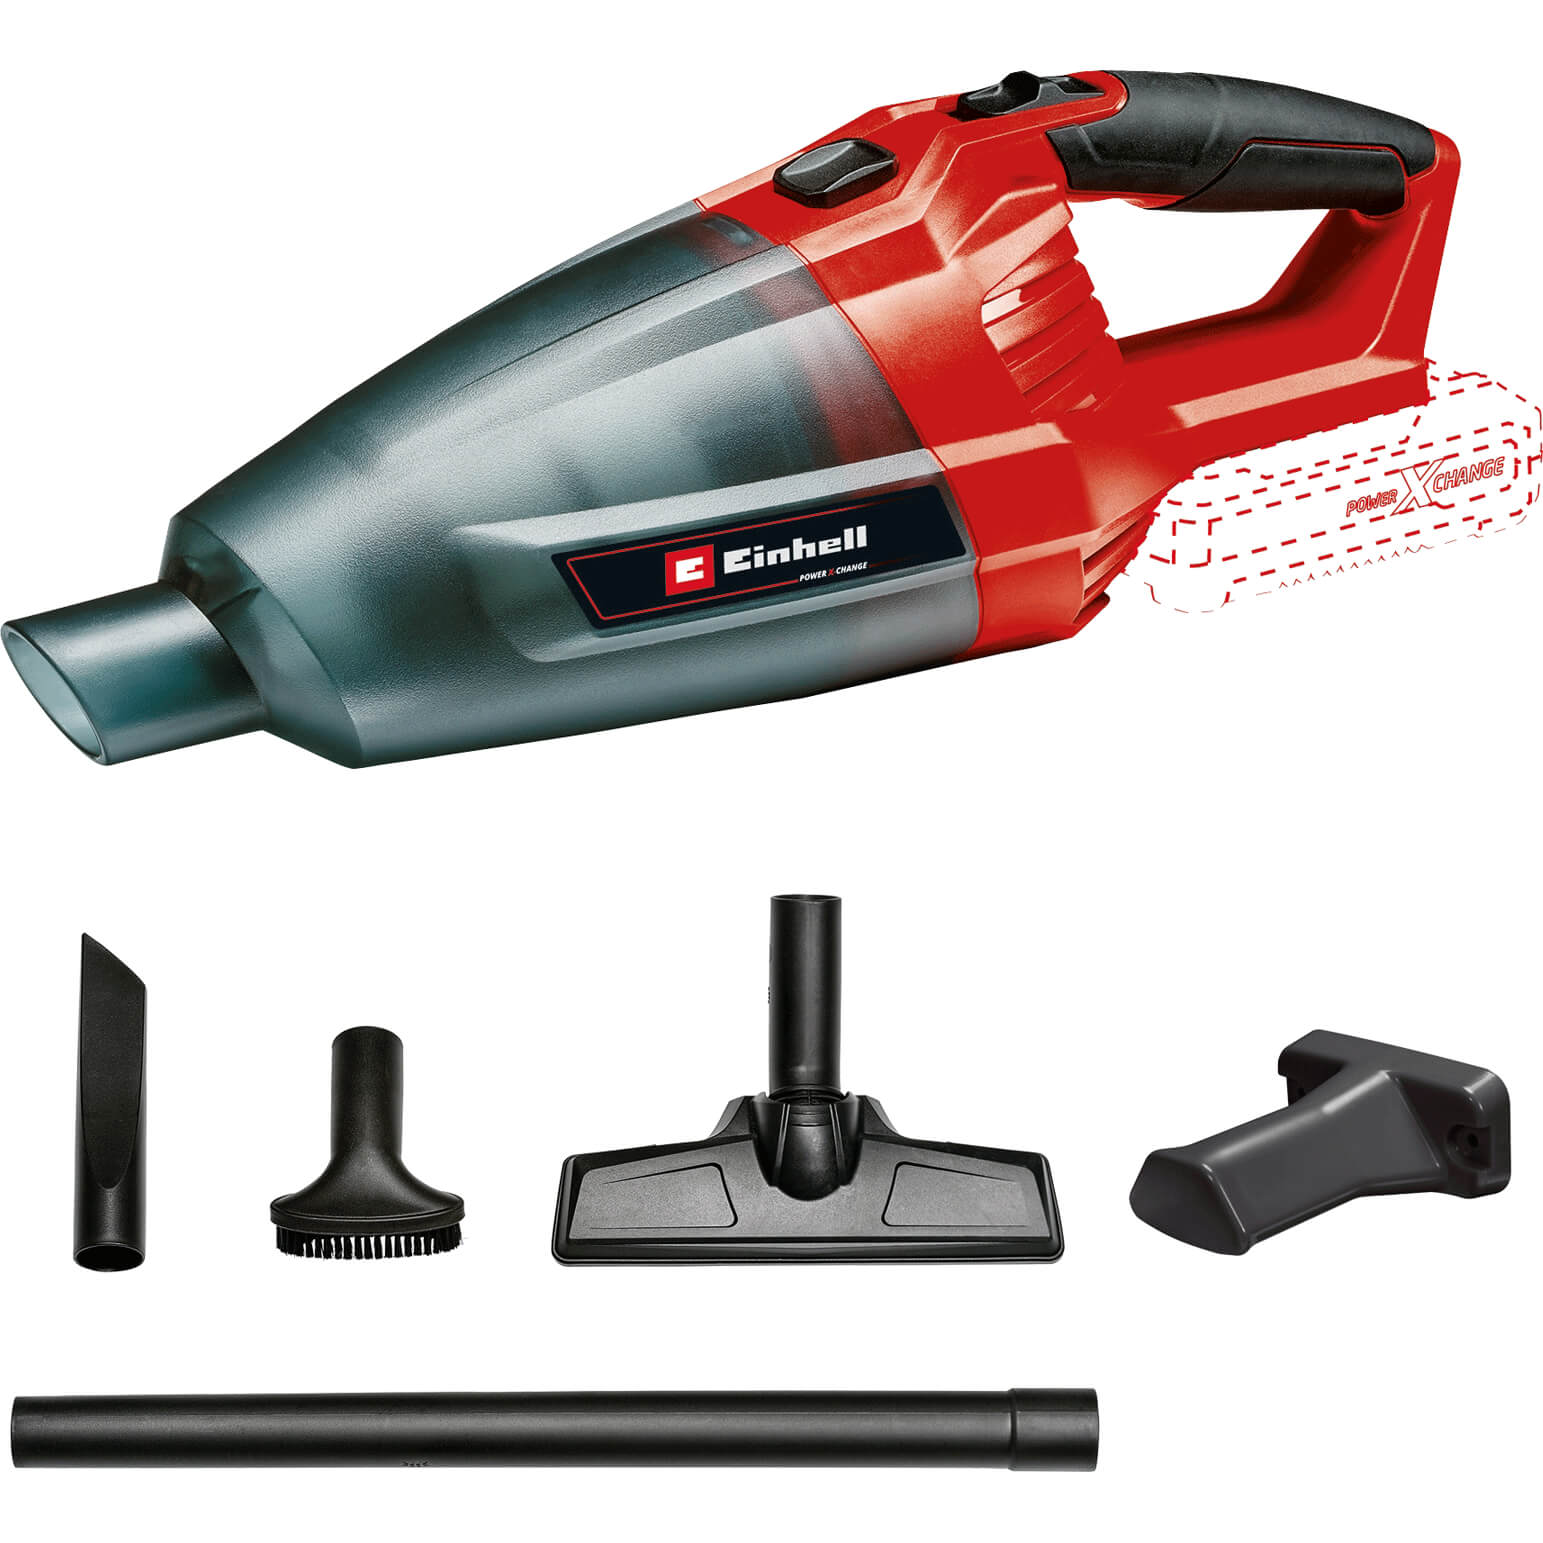 Photo of Einhell Te-vc 18 Li 18v Cordless Handheld Vaccuum Cleaner No Batteries No Charger No Case